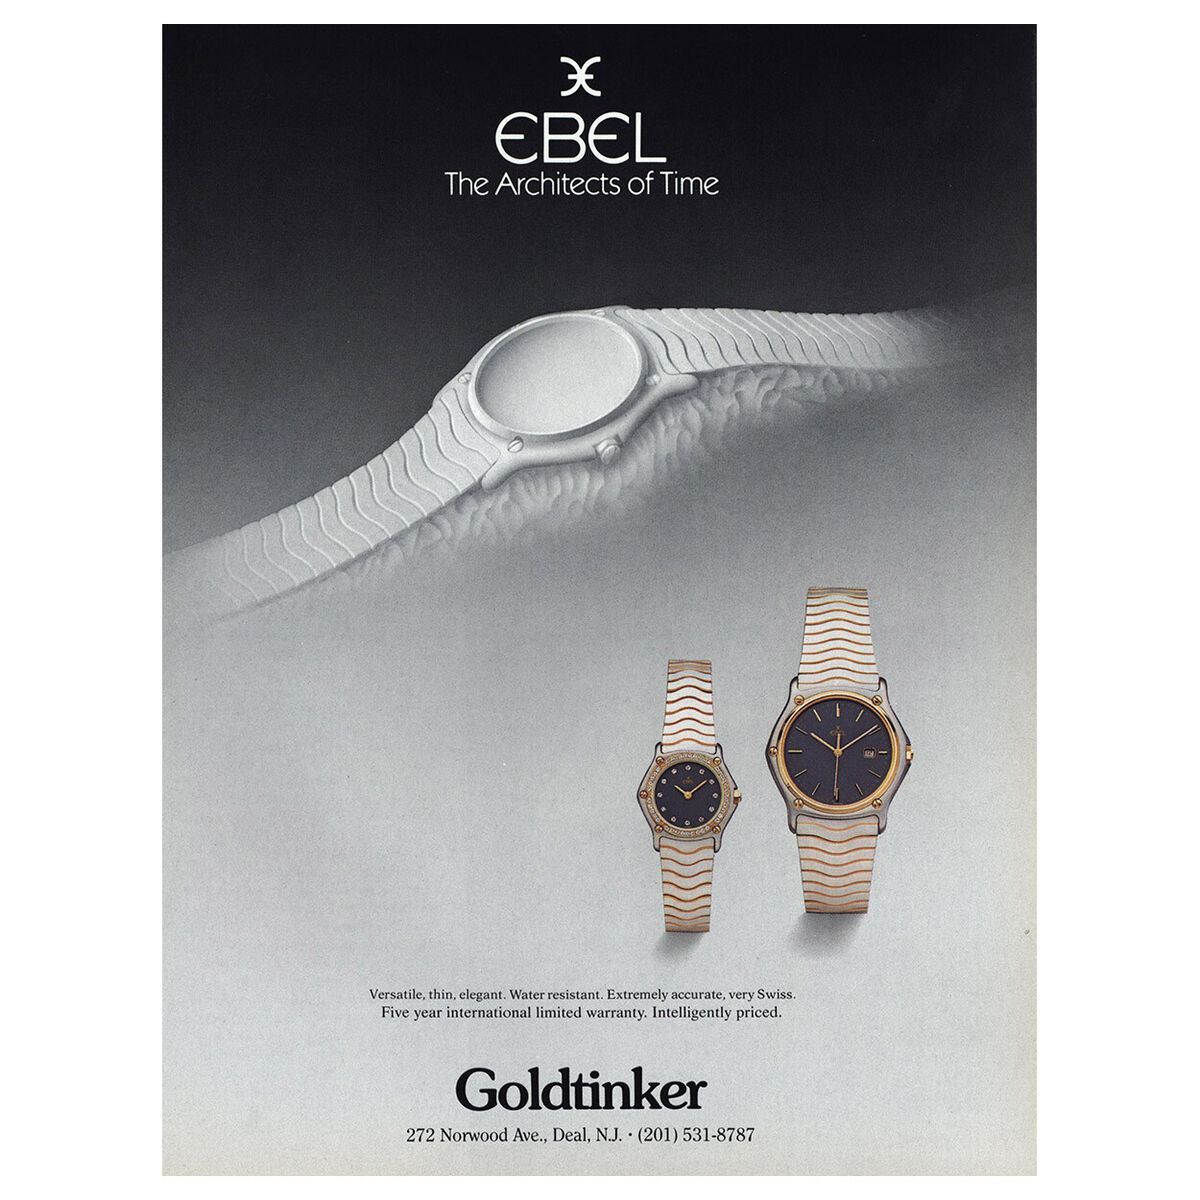 The Architects of time – Ebel